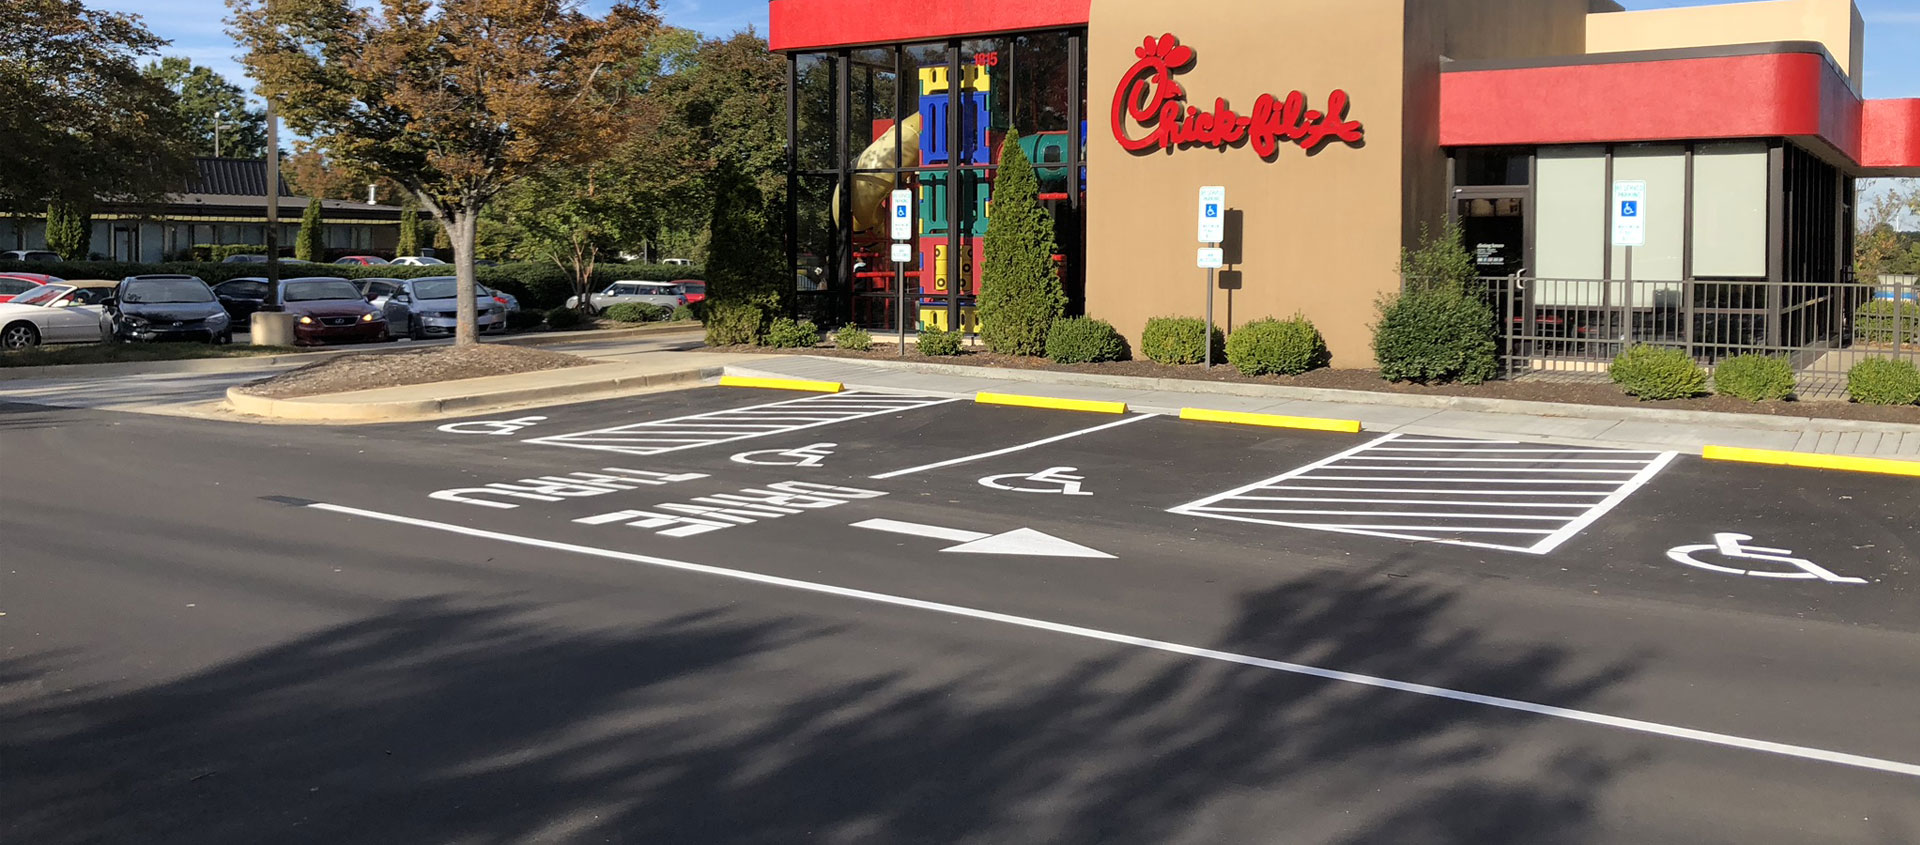 Chick-Fil-A in Cart at Crossroads Plaza